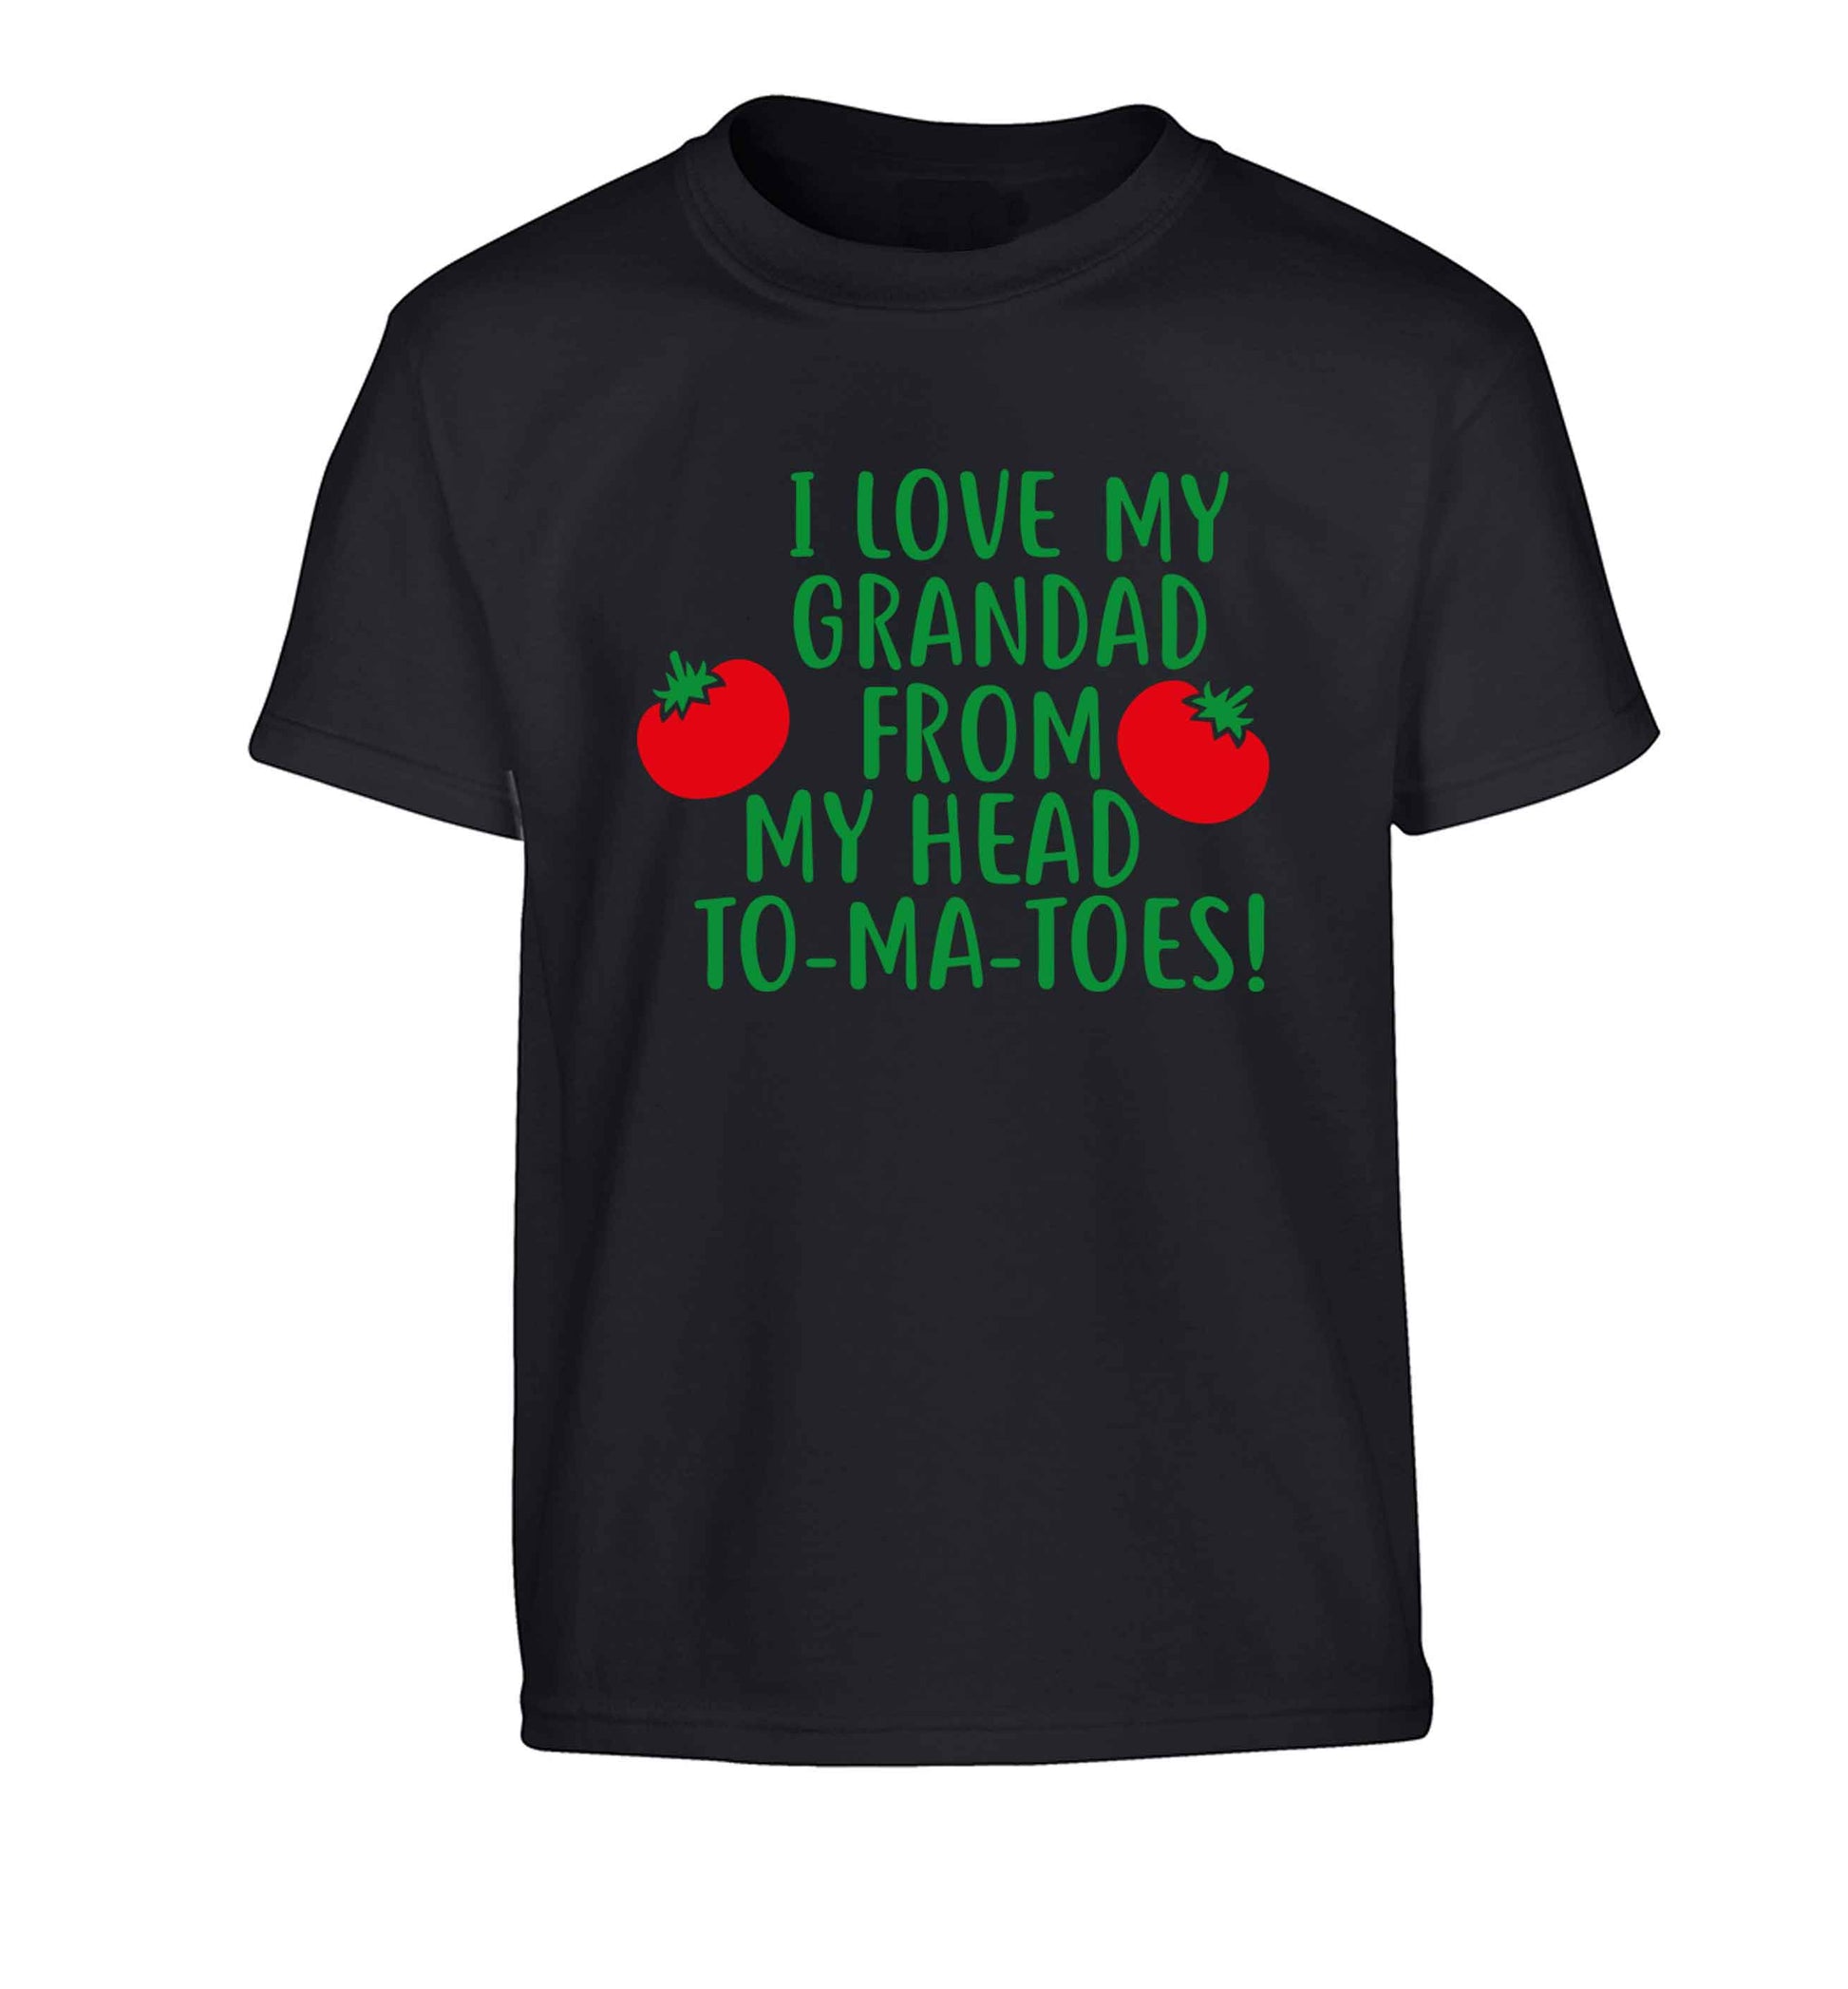 I love my grandad from my head To-Ma-Toes Children's black Tshirt 12-13 Years